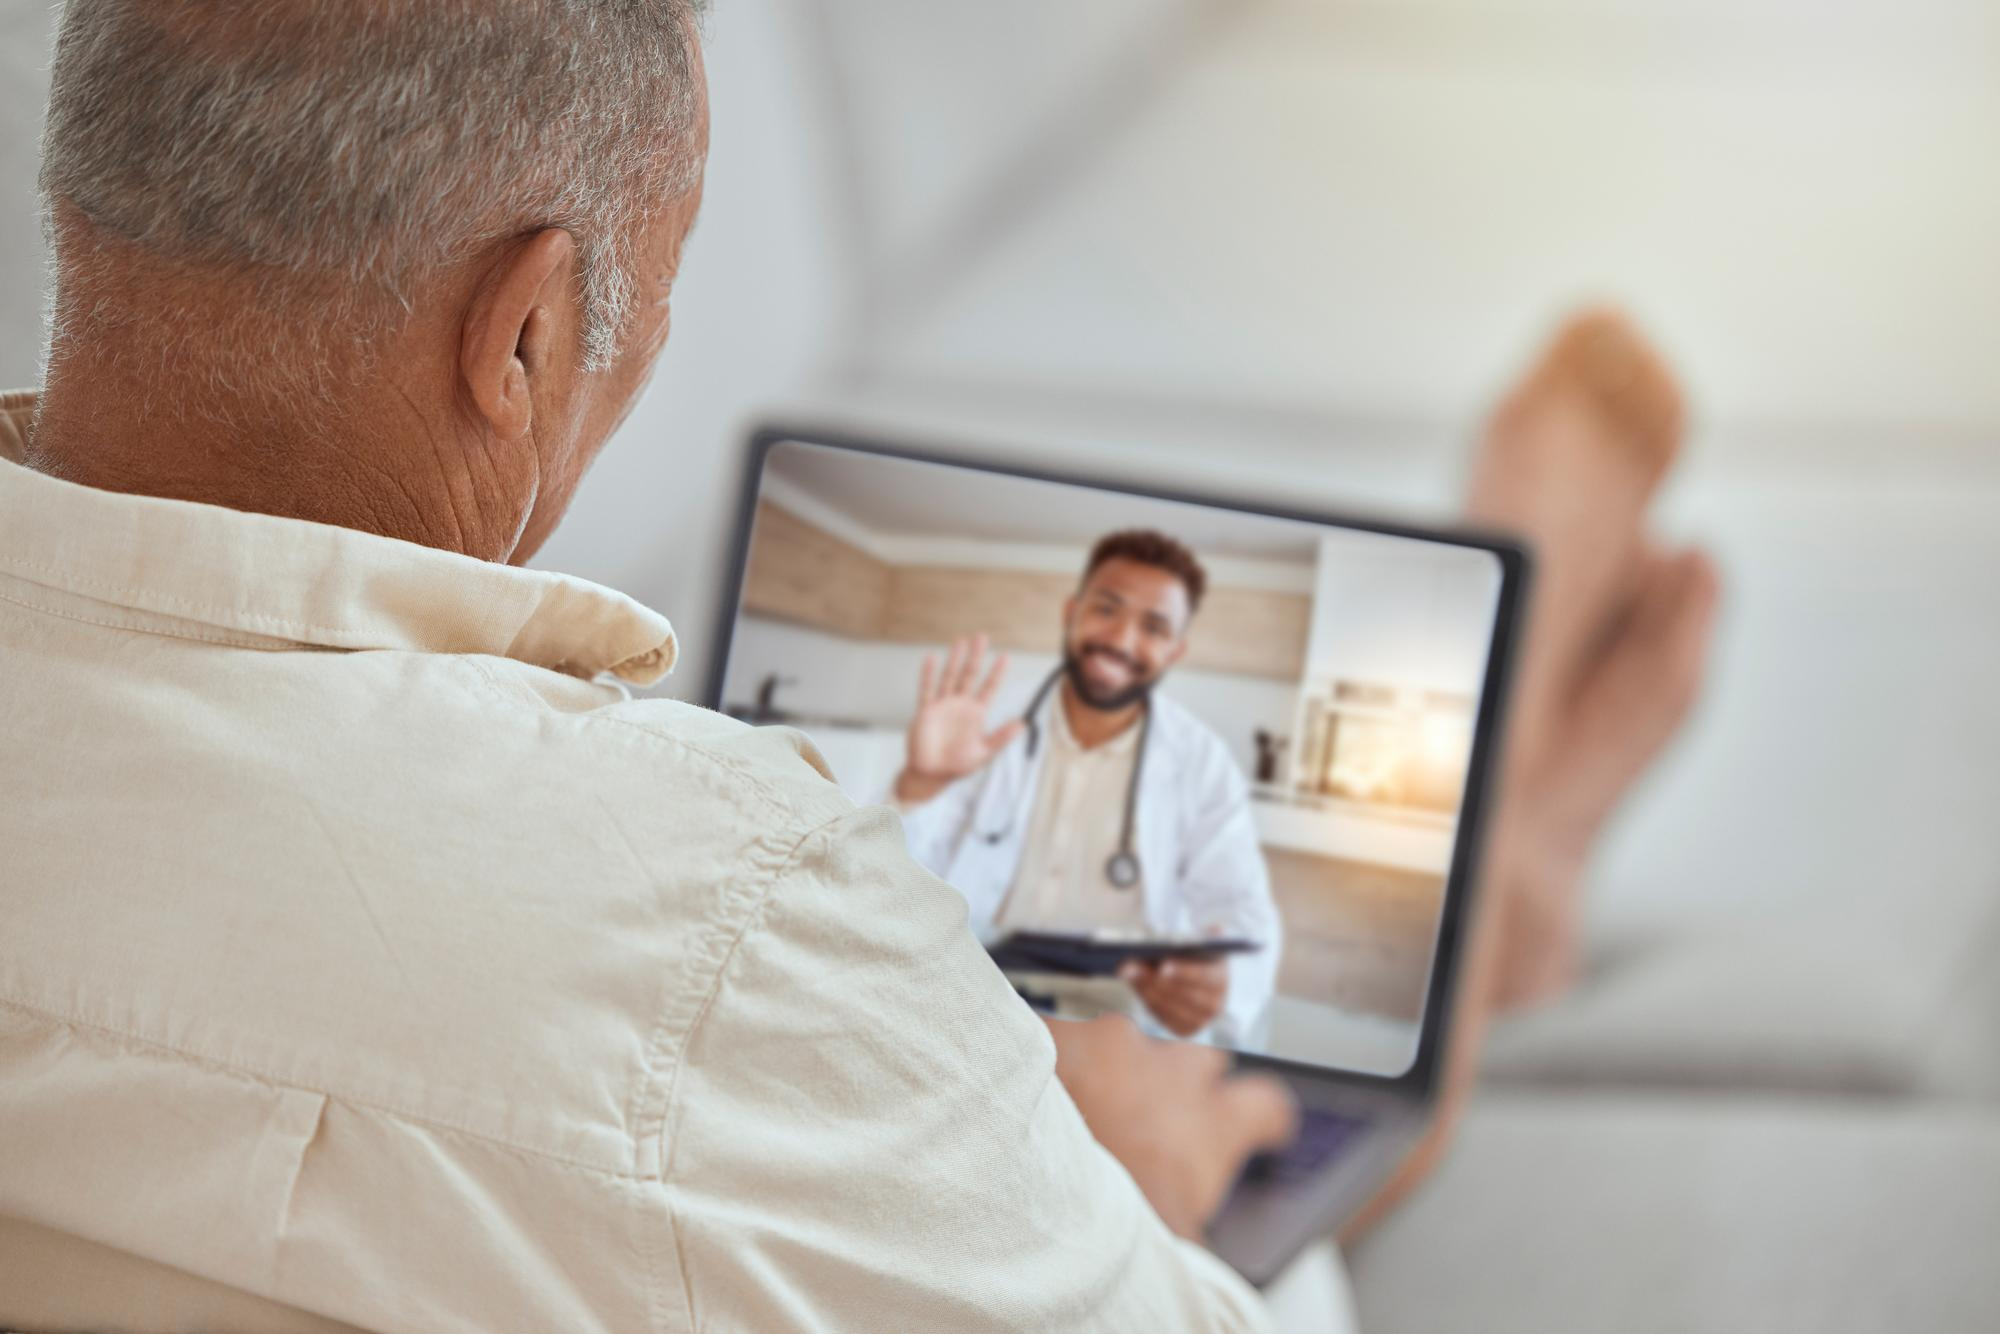 innovative-telemedicine-startups-of-india-promising-connected-healthcare